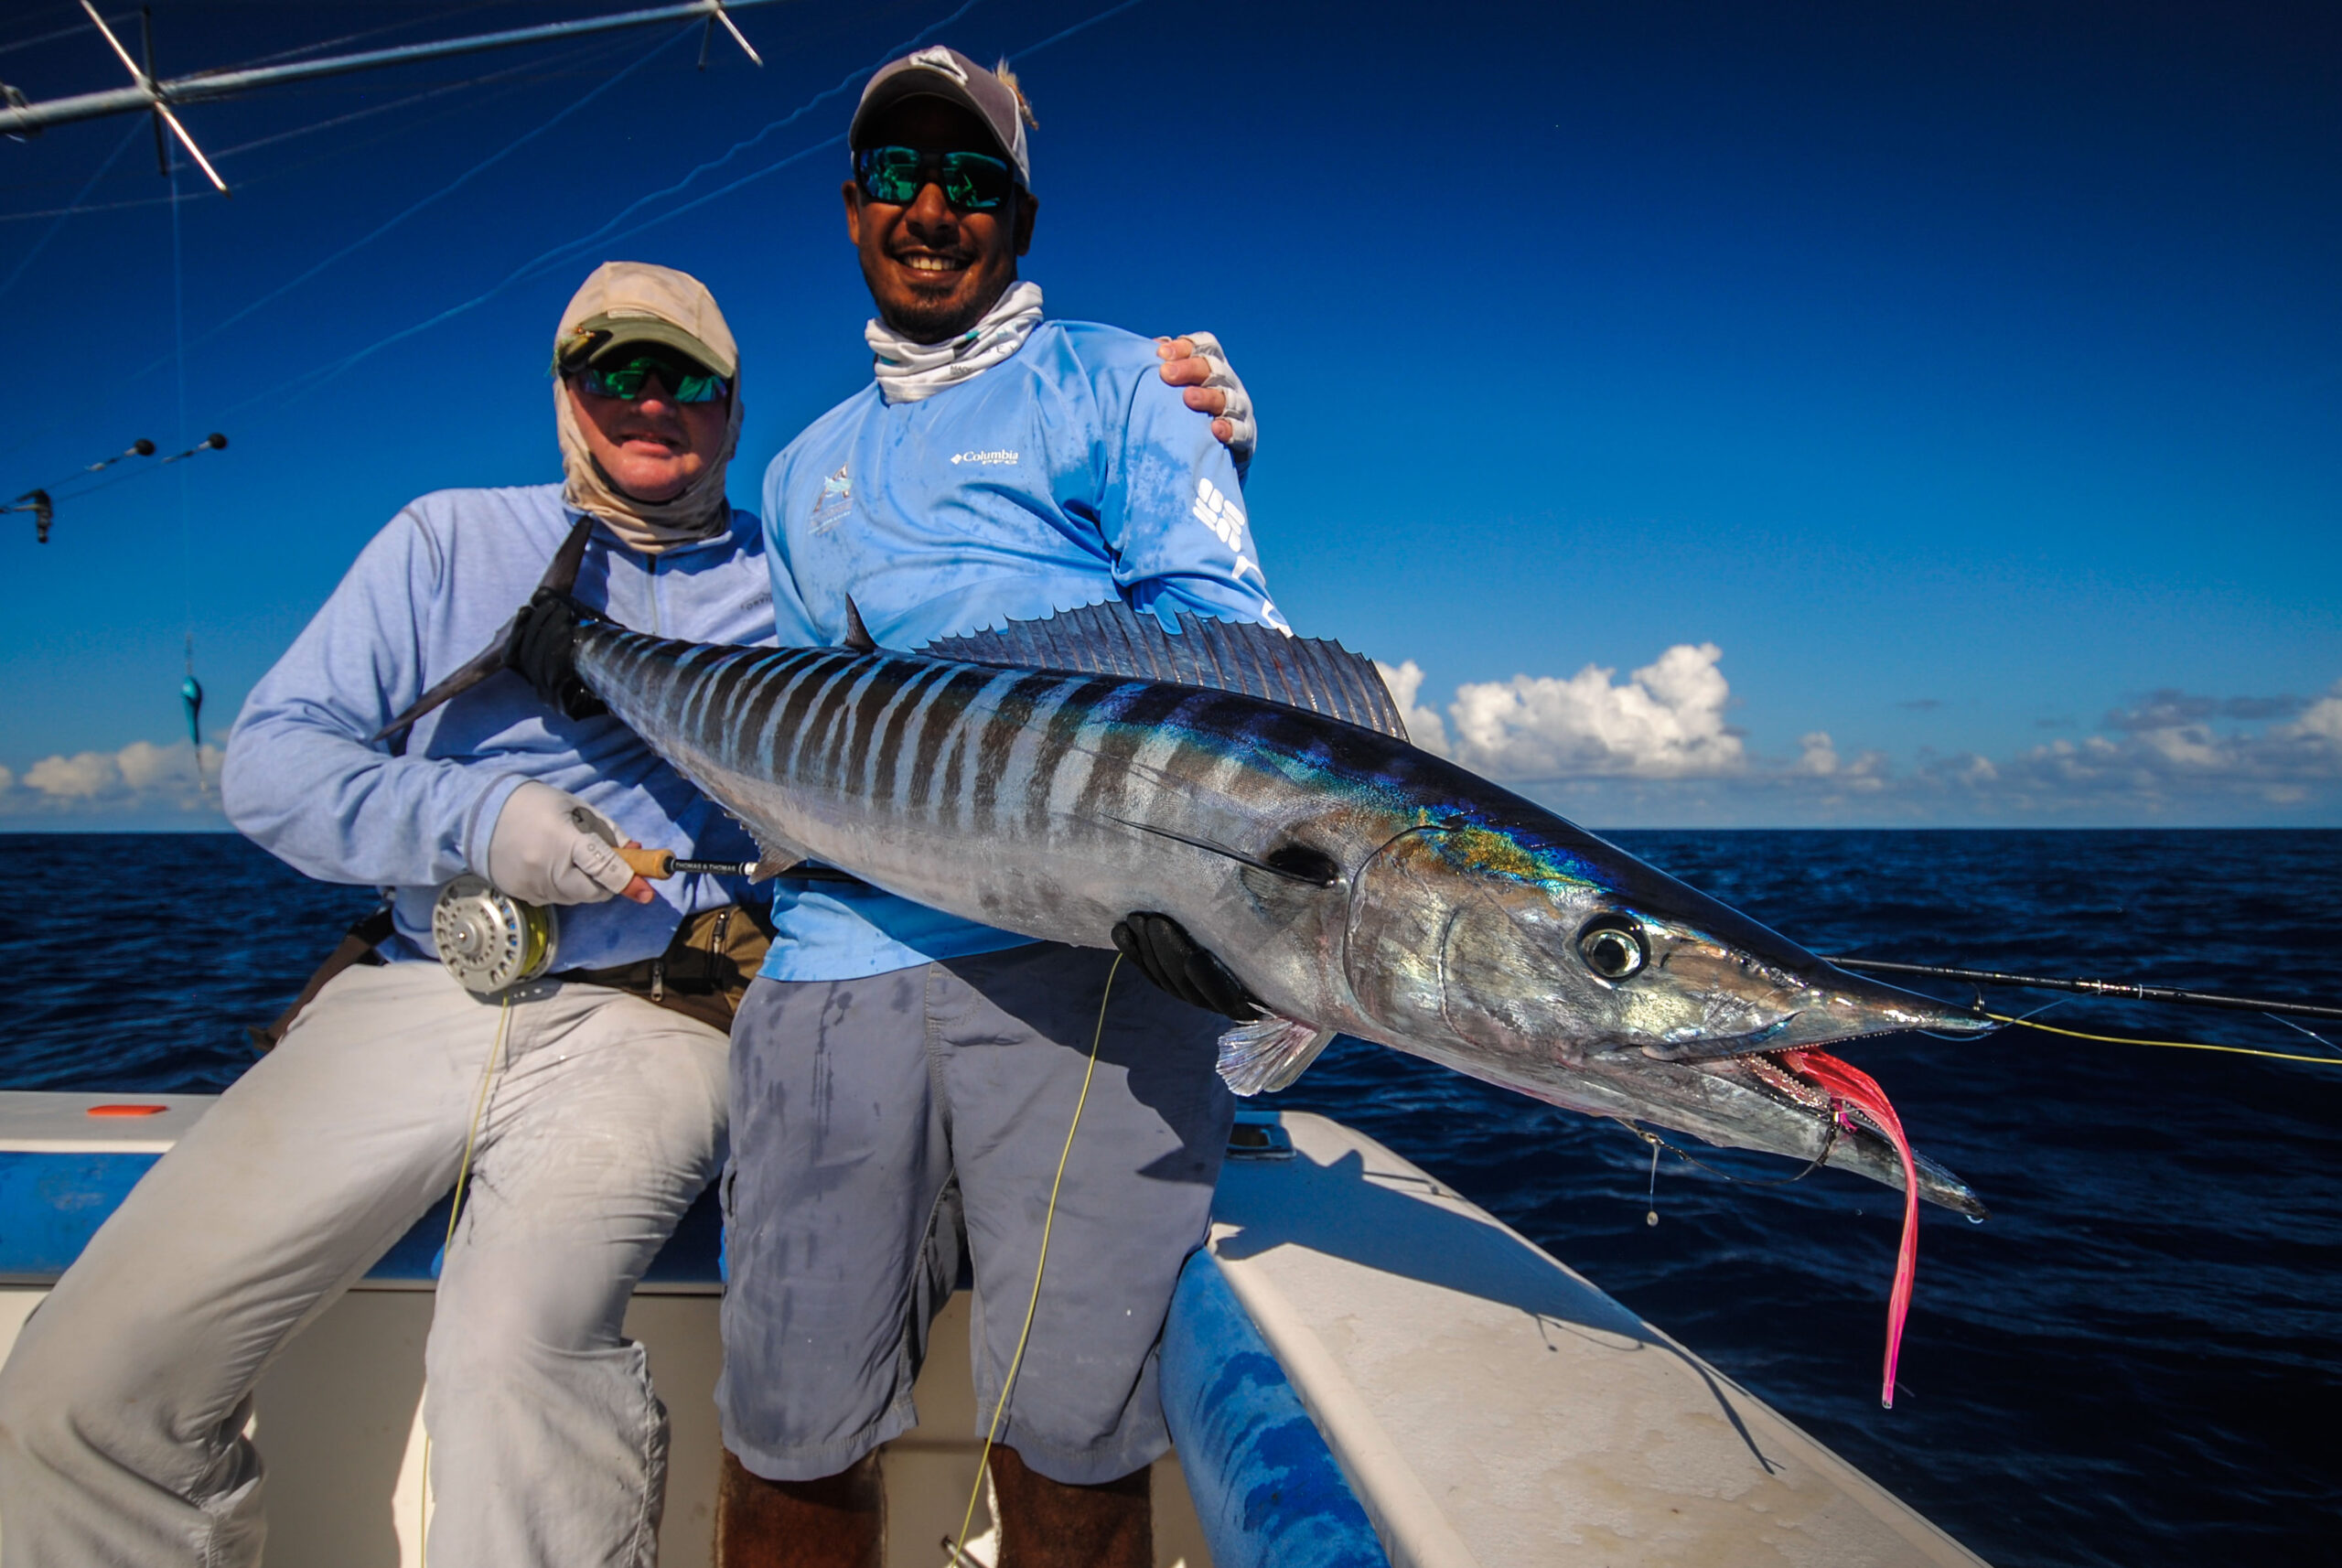 Fly Fishing Wahoo - The Catch, Facts, Flies, Rods & More